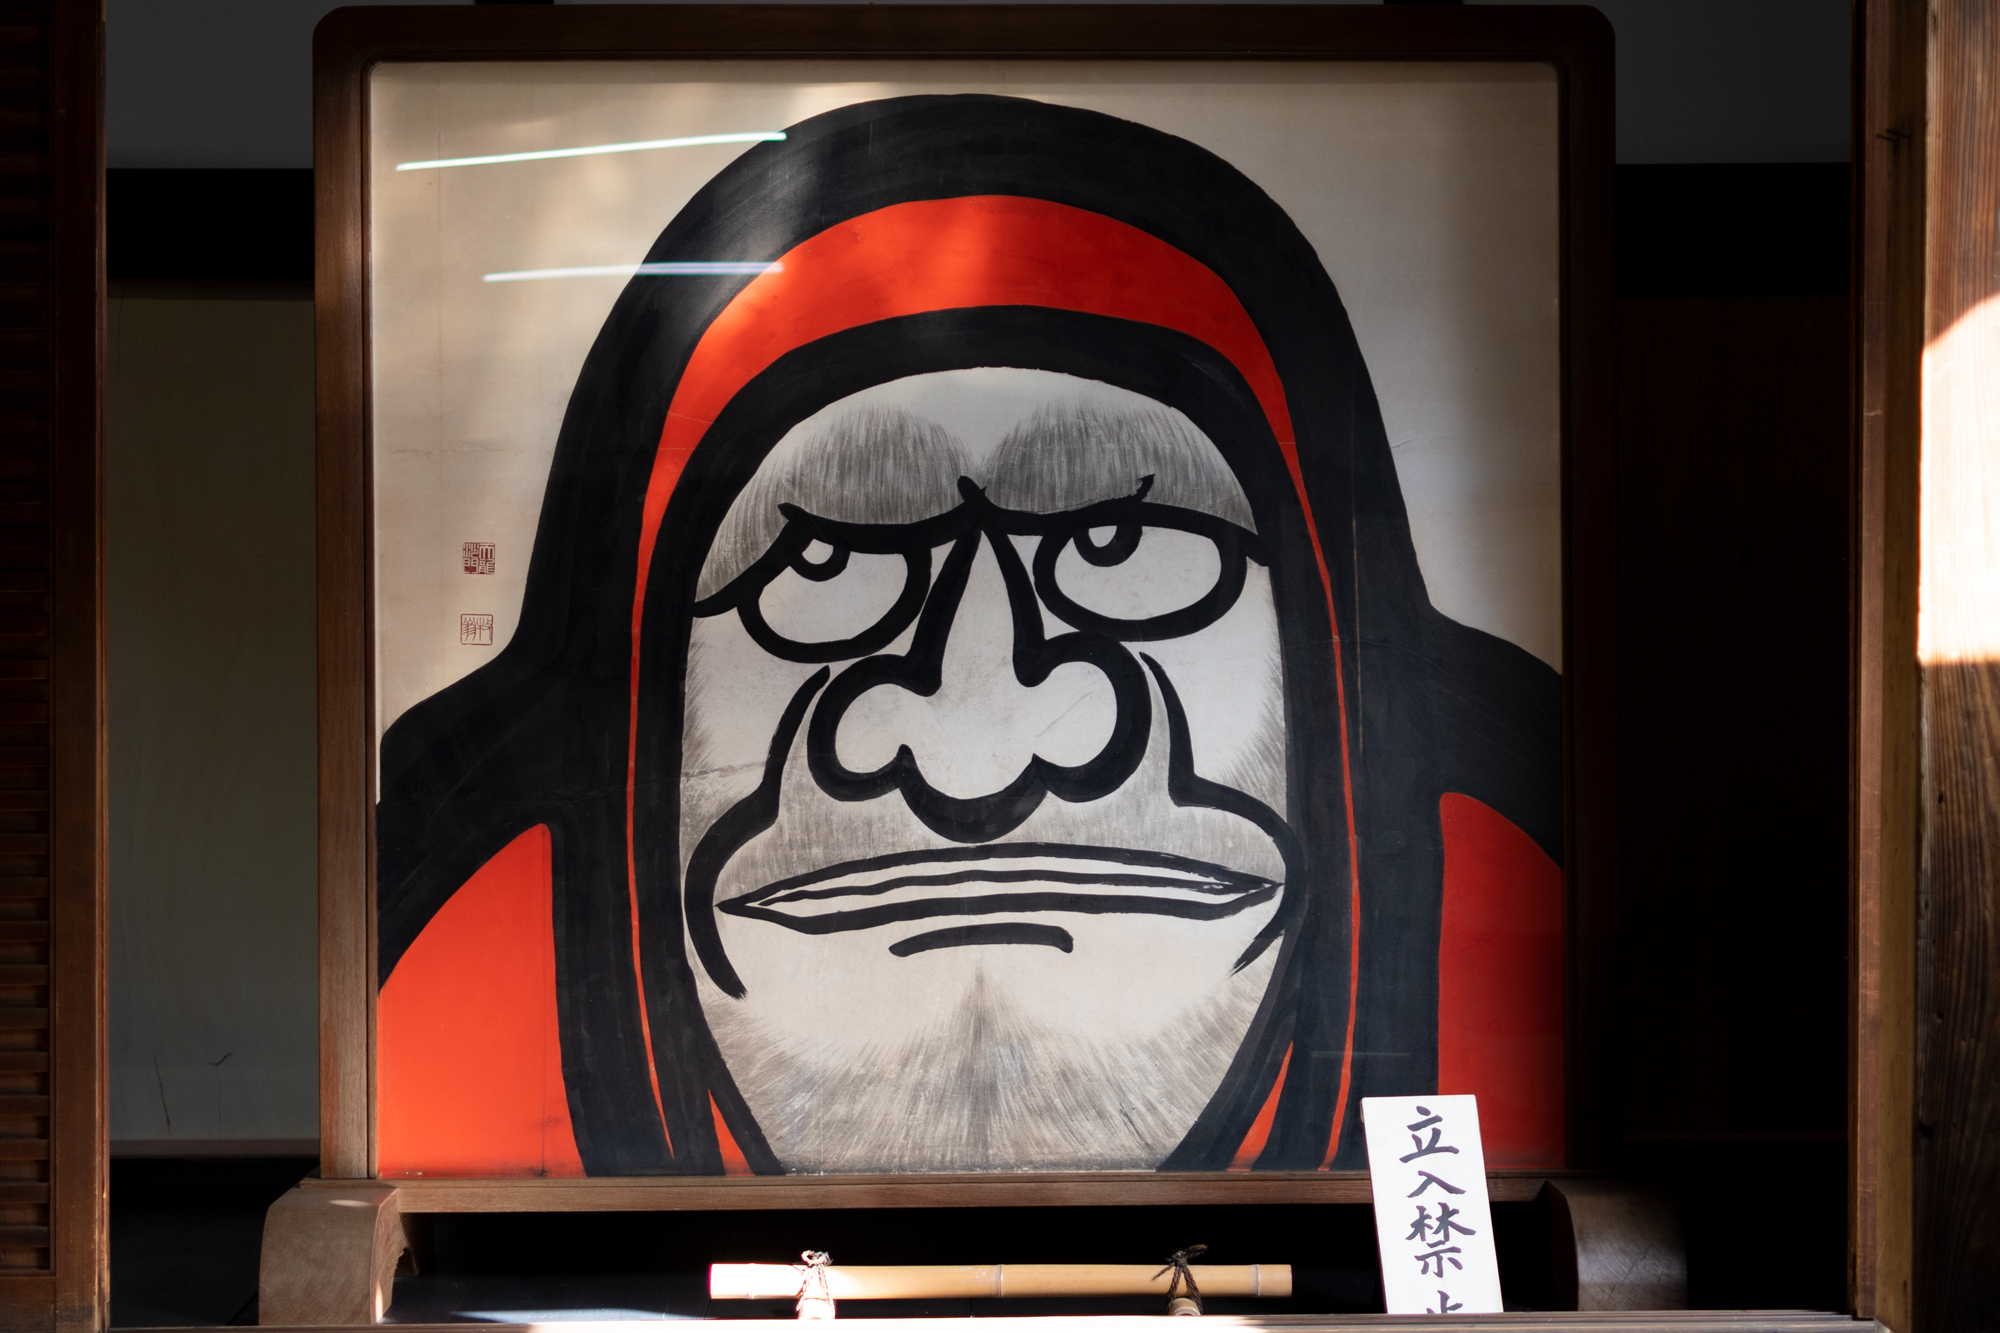 This painting was painted by the former head of Tenryuji Temple, Bokuou Seki. 